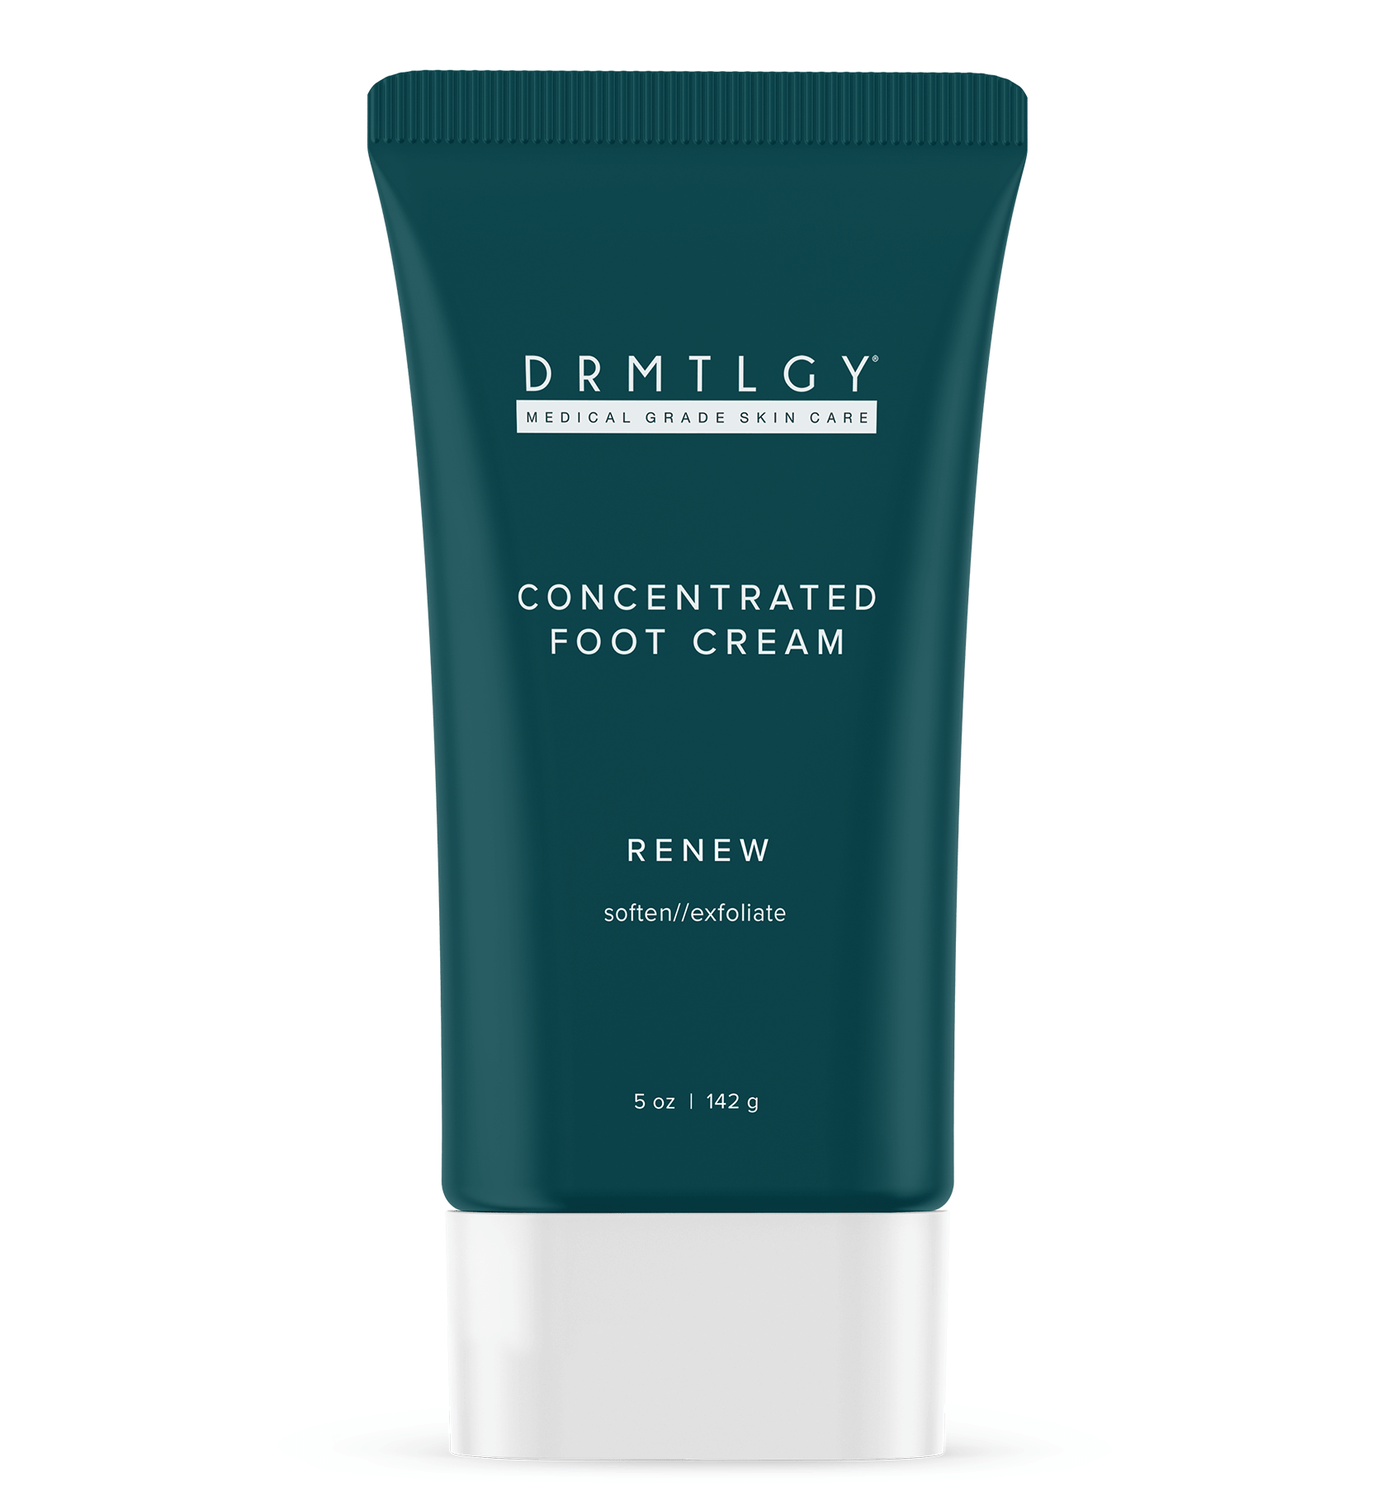 DRMTLGY - Concentrated Foot Cream